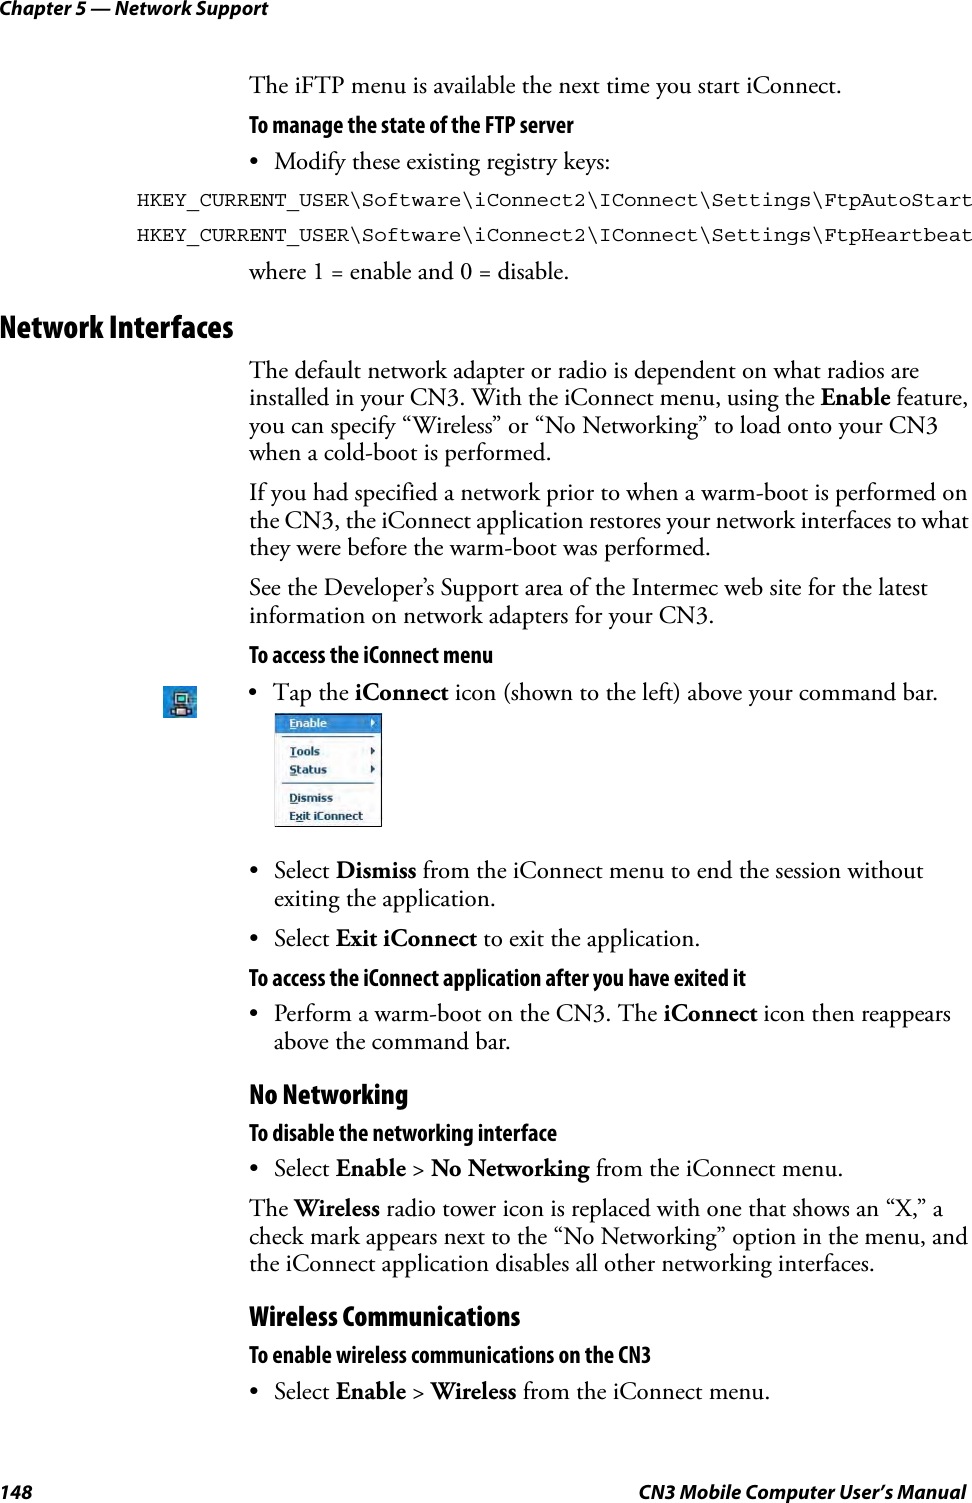 Chapter 5 — Network Support148 CN3 Mobile Computer User’s ManualThe iFTP menu is available the next time you start iConnect.To manage the state of the FTP server• Modify these existing registry keys:HKEY_CURRENT_USER\Software\iConnect2\IConnect\Settings\FtpAutoStartHKEY_CURRENT_USER\Software\iConnect2\IConnect\Settings\FtpHeartbeatwhere 1 = enable and 0 = disable.Network InterfacesThe default network adapter or radio is dependent on what radios are installed in your CN3. With the iConnect menu, using the Enable feature, you can specify “Wireless” or “No Networking” to load onto your CN3 when a cold-boot is performed. If you had specified a network prior to when a warm-boot is performed on the CN3, the iConnect application restores your network interfaces to what they were before the warm-boot was performed.See the Developer’s Support area of the Intermec web site for the latest information on network adapters for your CN3.To access the iConnect menu• Select Dismiss from the iConnect menu to end the session without exiting the application.• Select Exit iConnect to exit the application. To access the iConnect application after you have exited it• Perform a warm-boot on the CN3. The iConnect icon then reappears above the command bar.No NetworkingTo disable the networking interface • Select Enable &gt; No Networking from the iConnect menu. The Wireless radio tower icon is replaced with one that shows an “X,” a check mark appears next to the “No Networking” option in the menu, and the iConnect application disables all other networking interfaces.Wireless CommunicationsTo enable wireless communications on the CN3• Select Enable &gt; Wireless from the iConnect menu. •Tap the iConnect icon (shown to the left) above your command bar.